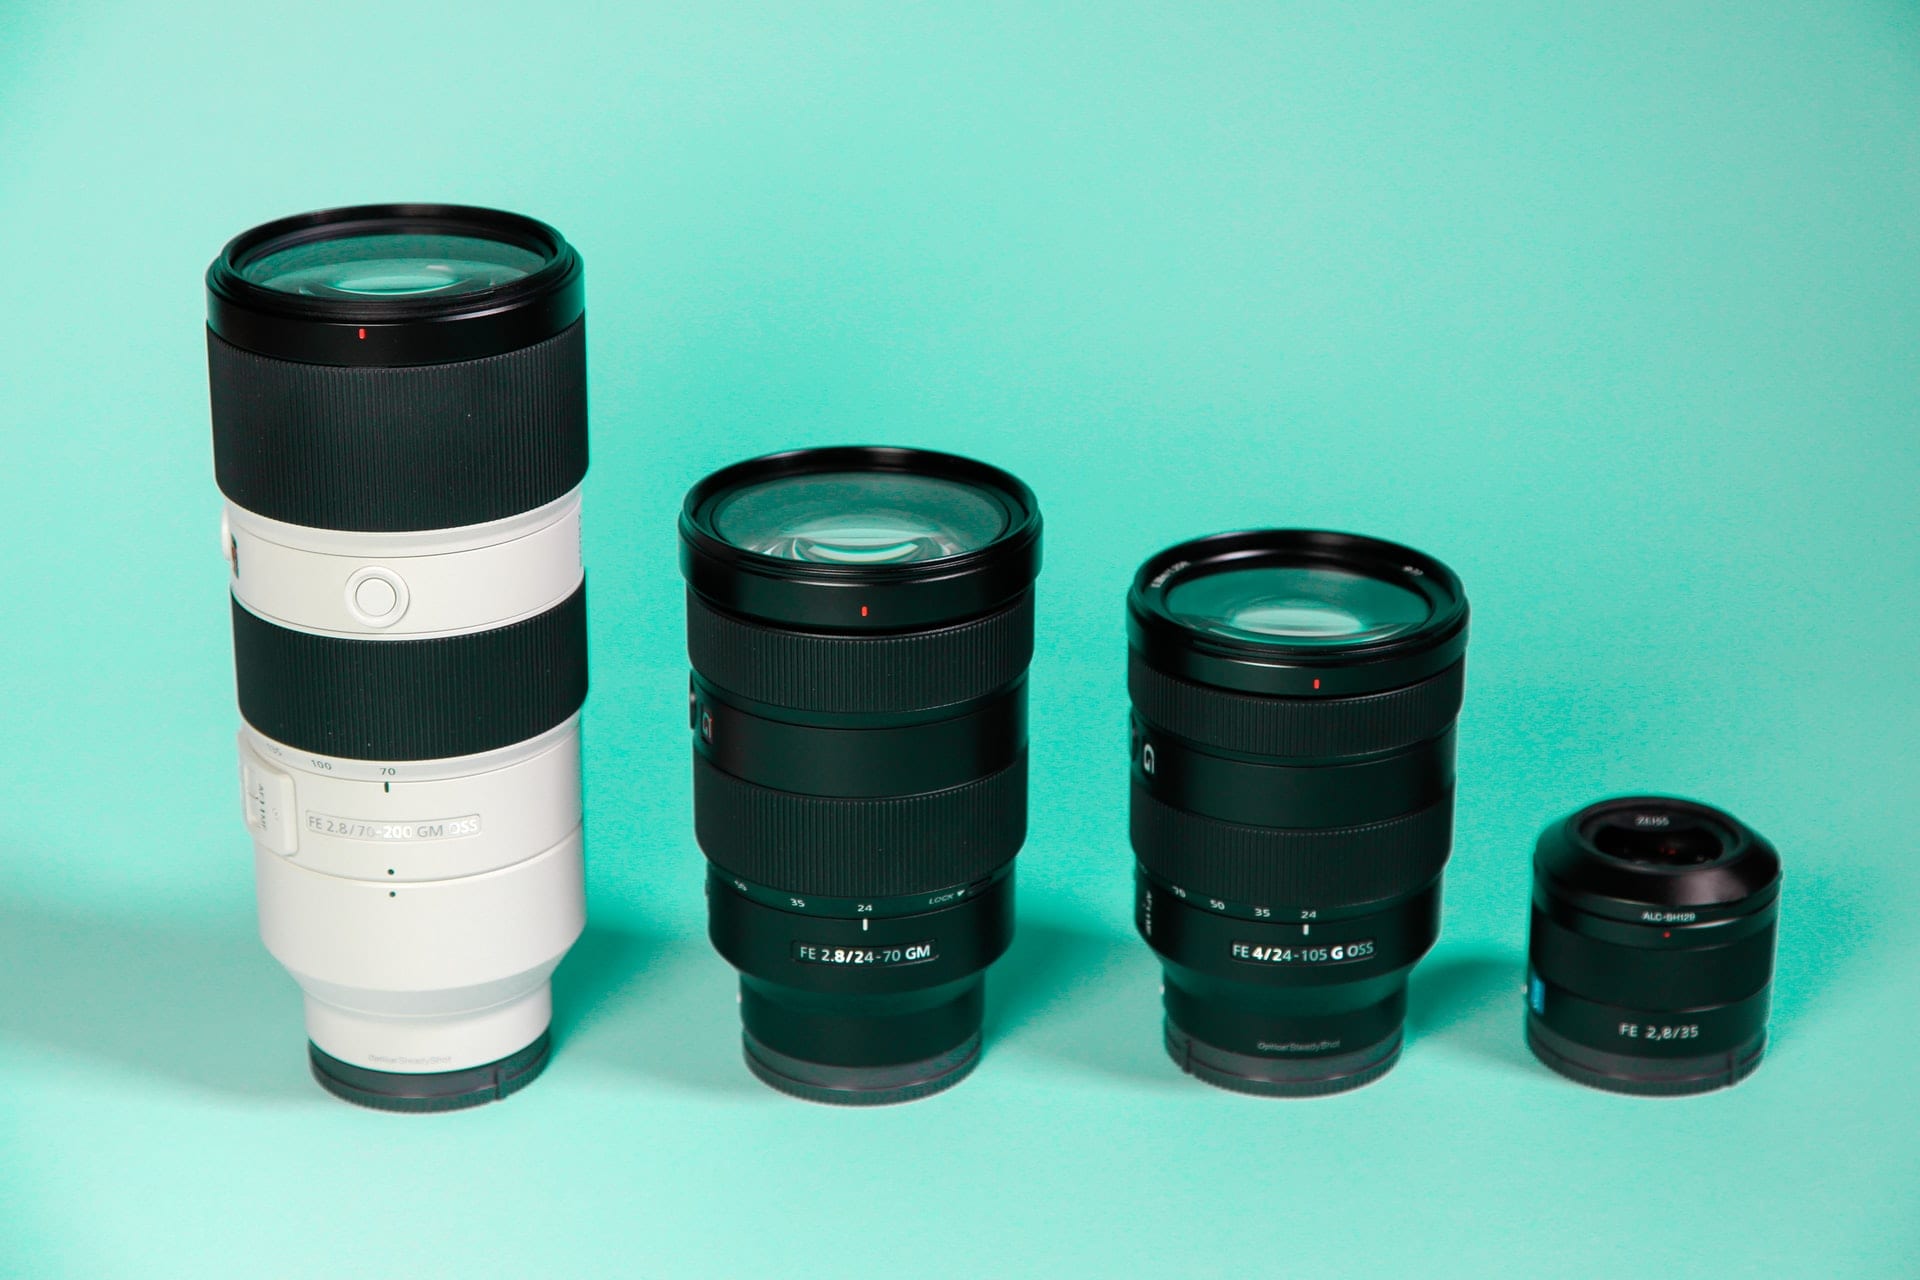 How to Choose Camera lens for Different Types of